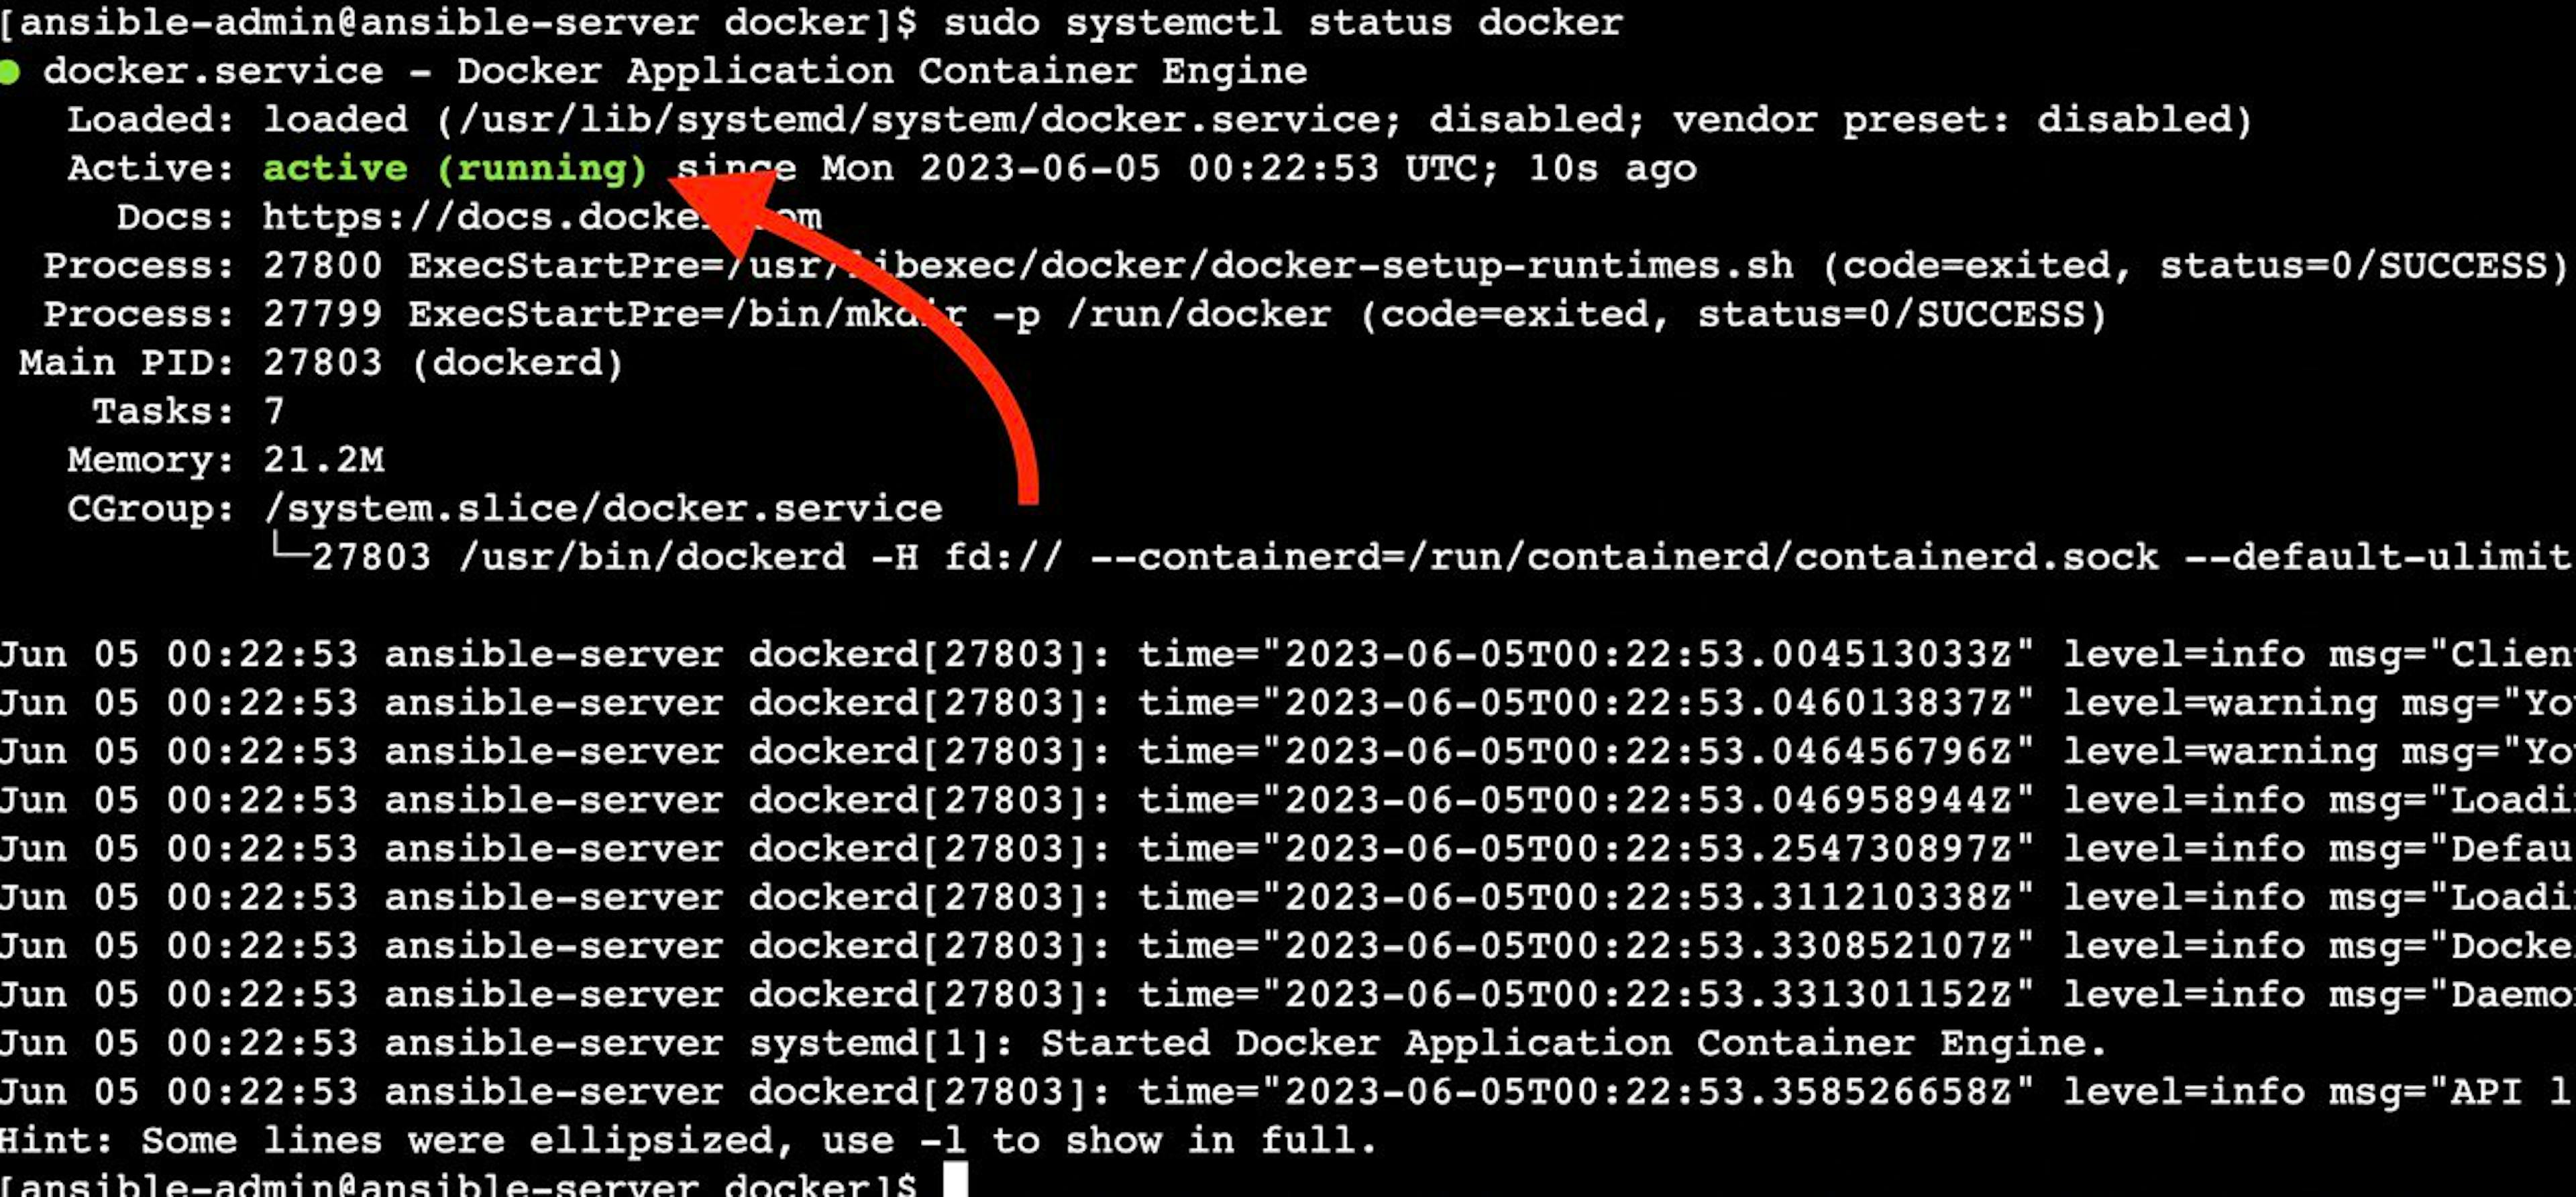 The screenshot of Ansible EC2 instance with the active docker status